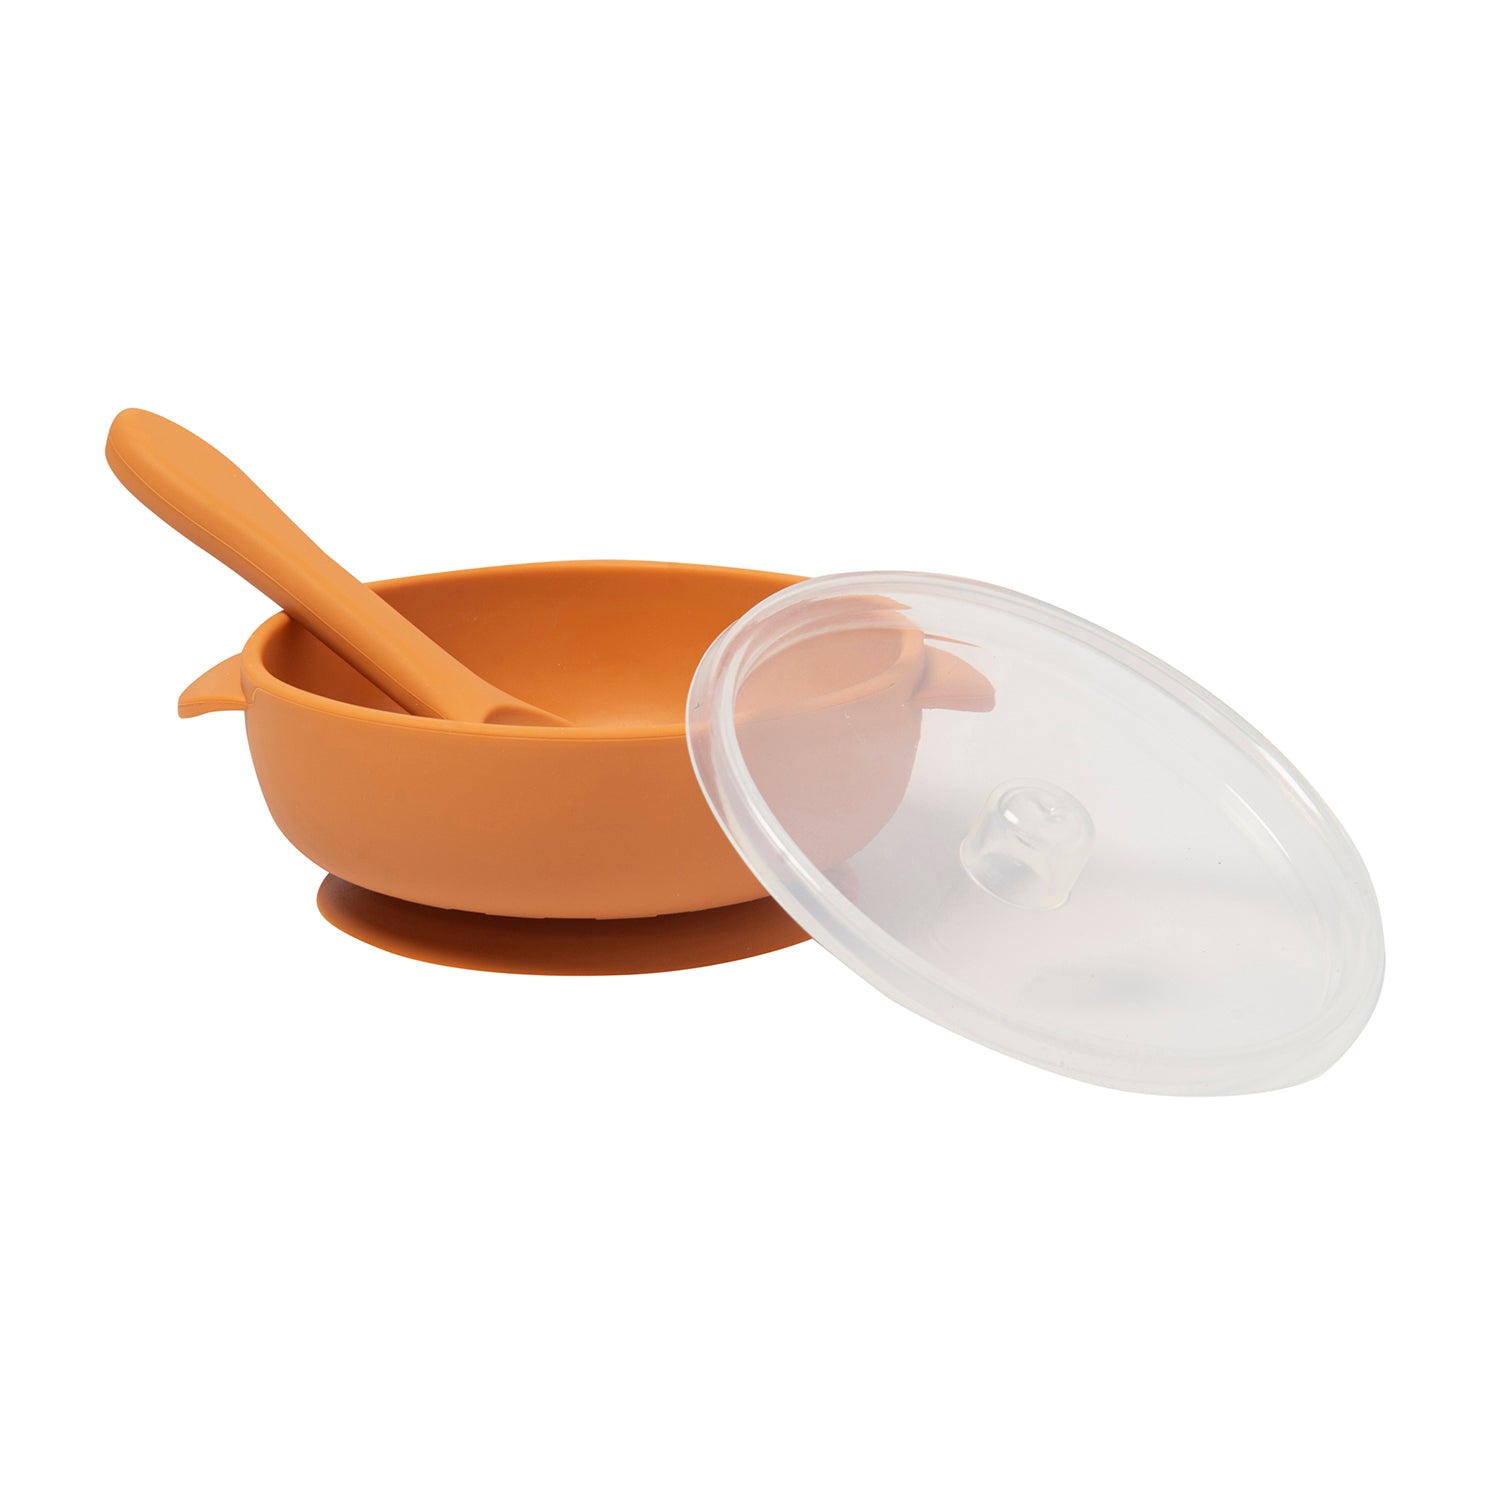 Brown Silicon Bowl With Lid And Spoon Set